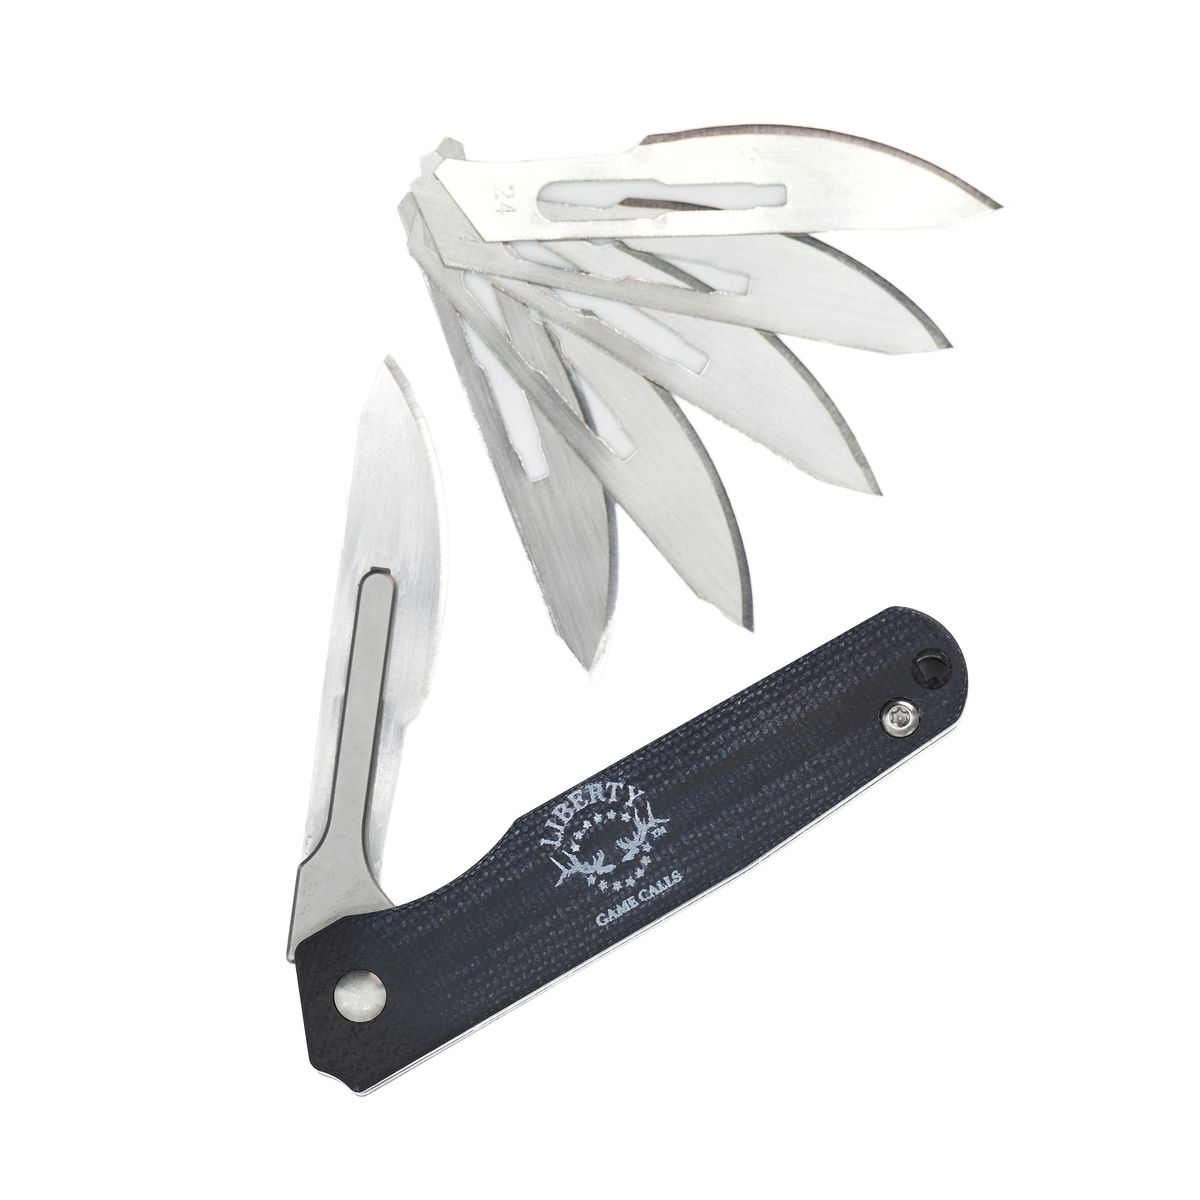 The Switchback- Replaceable Razor Blade Hunting Knives